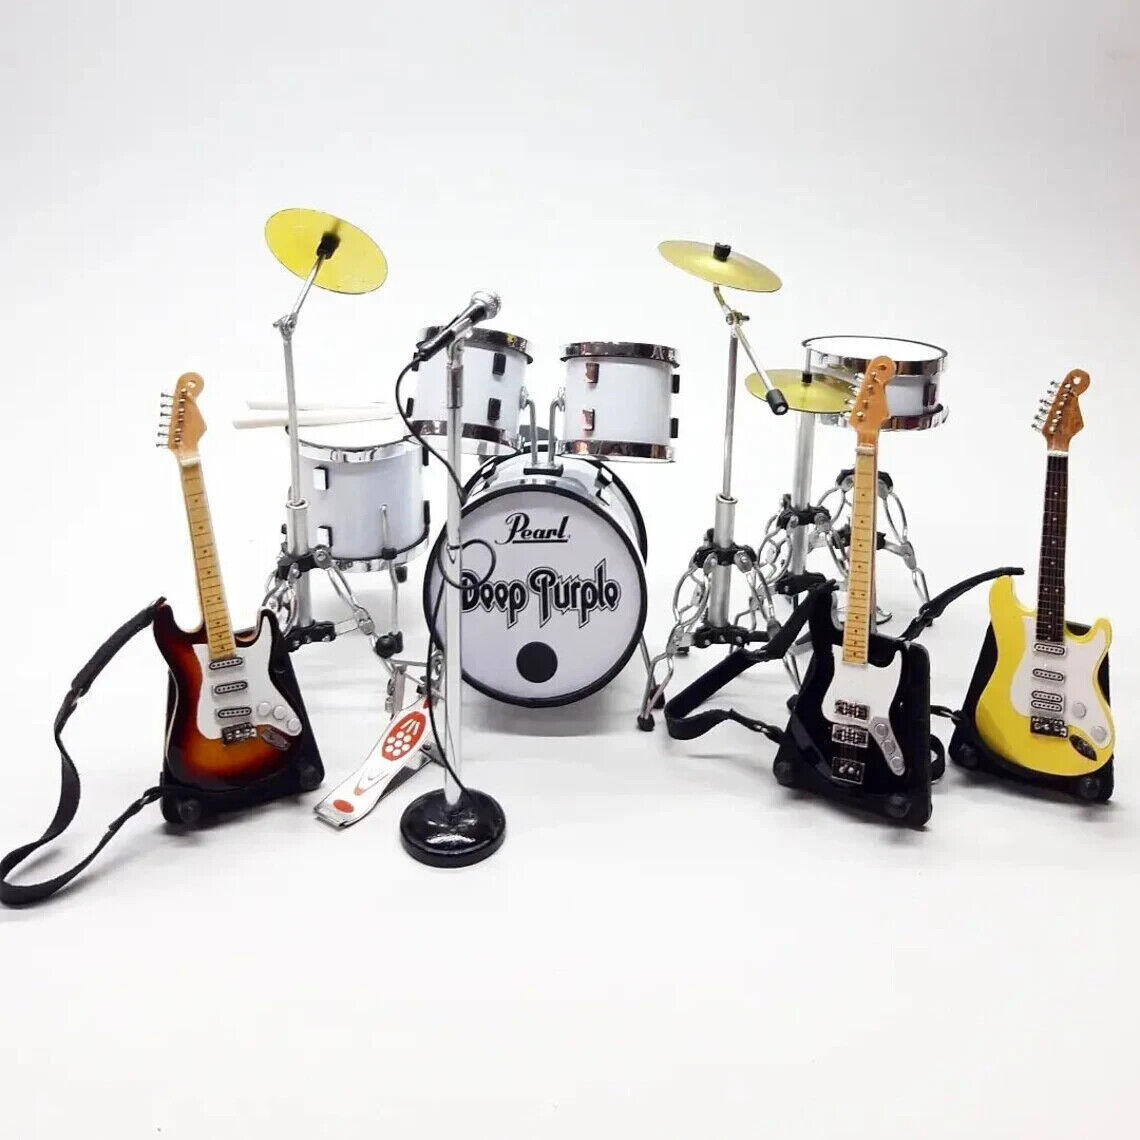 Miniature Drum Set White 3 Guitar Mic Exclusive Band Gift Display Scale 1:12